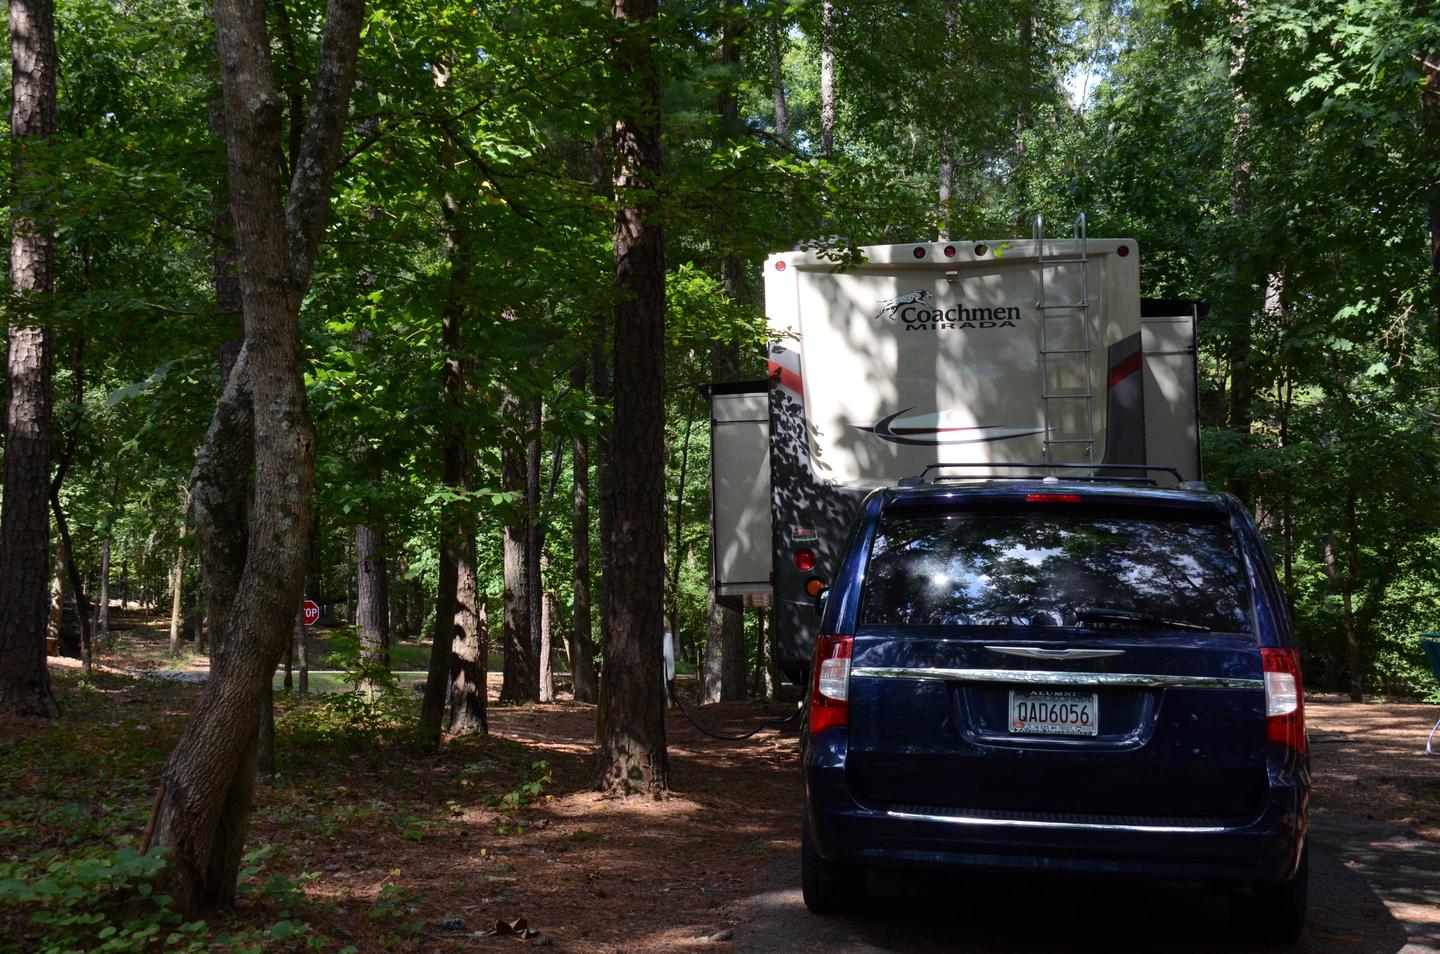 Pull-thru entrance, utilities clearance.McKinney Campground, campsite 19.